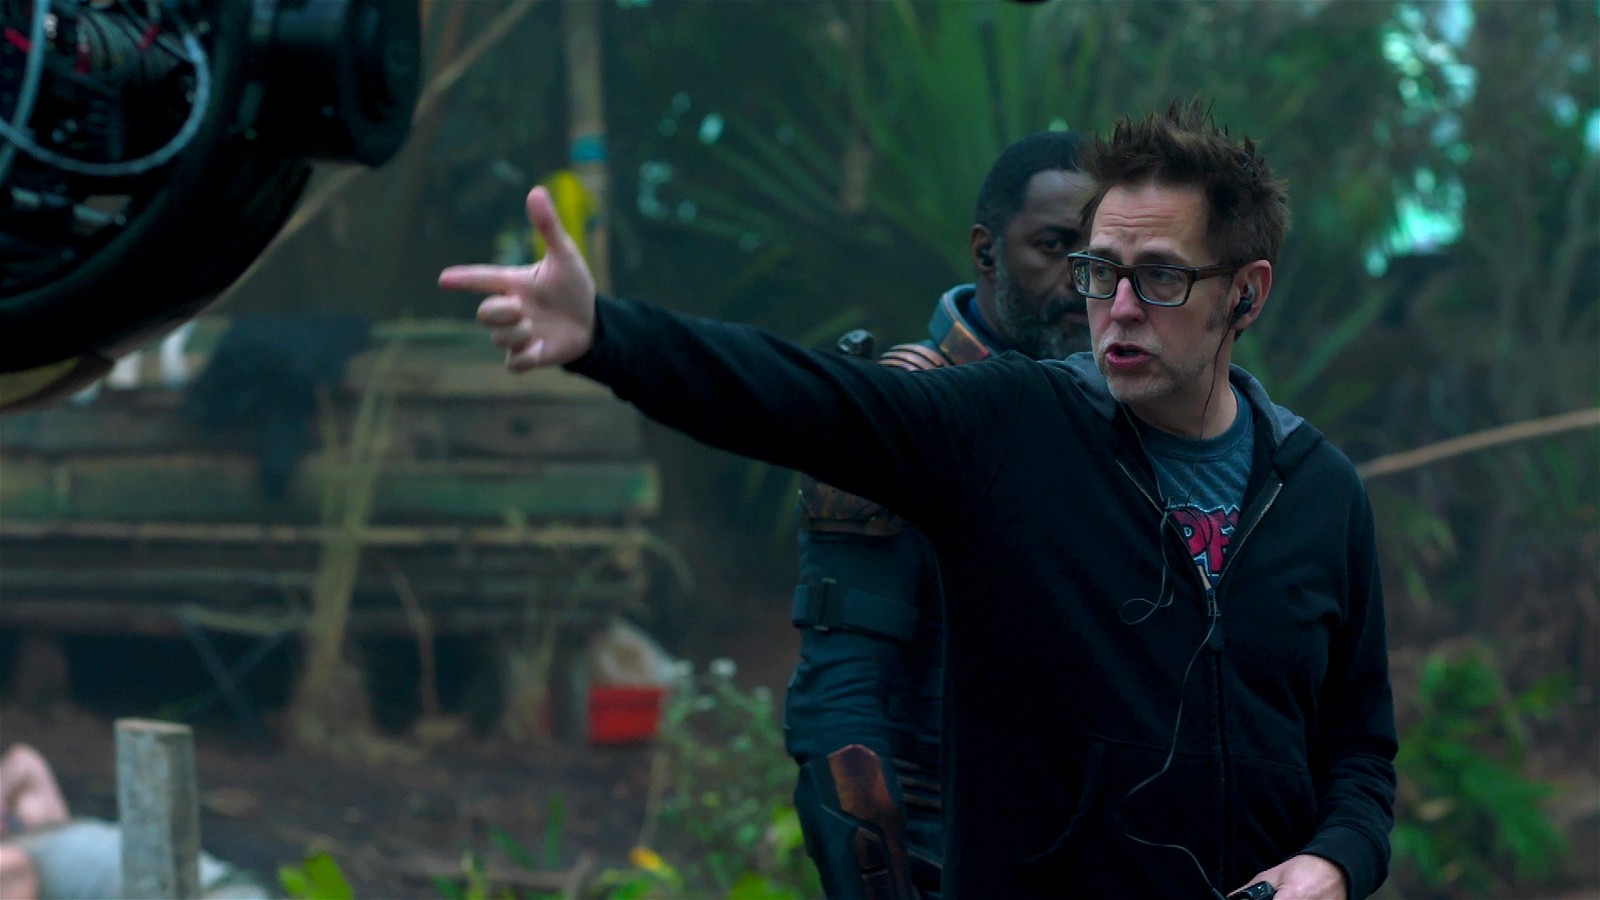 James Gunn on The Suicide Squad set